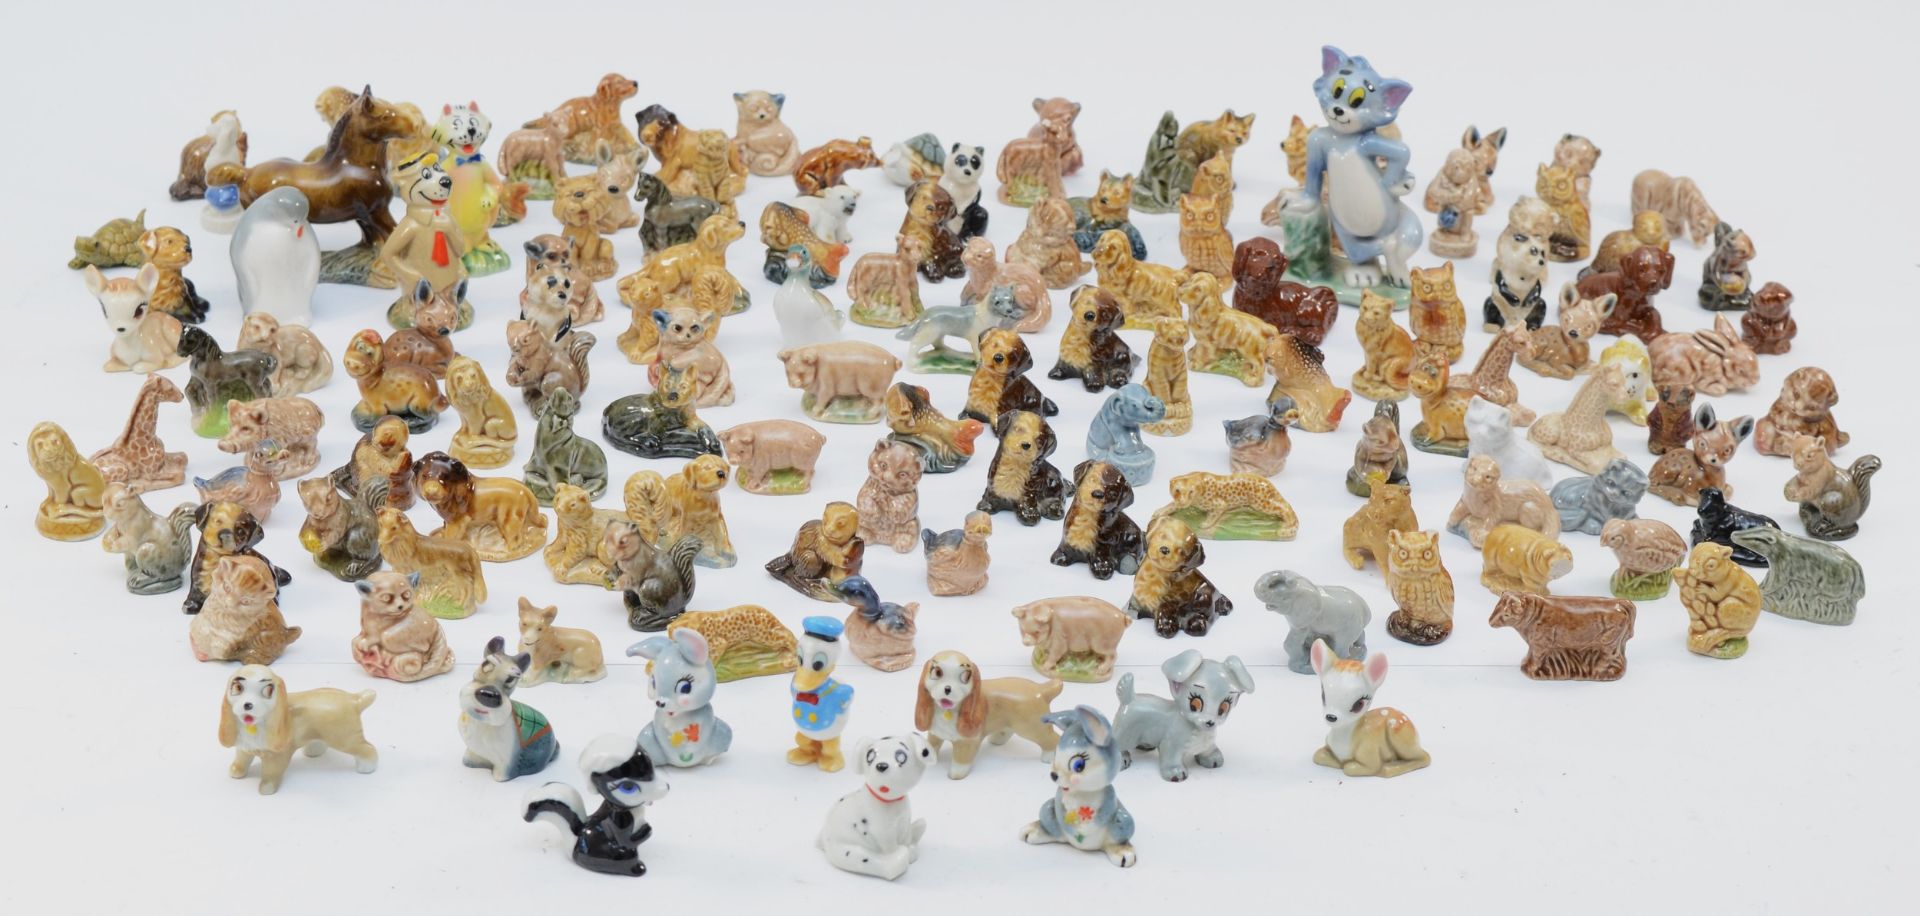 A large collection of Wade 'whimsies' porcelain figures and animal models, including Disney